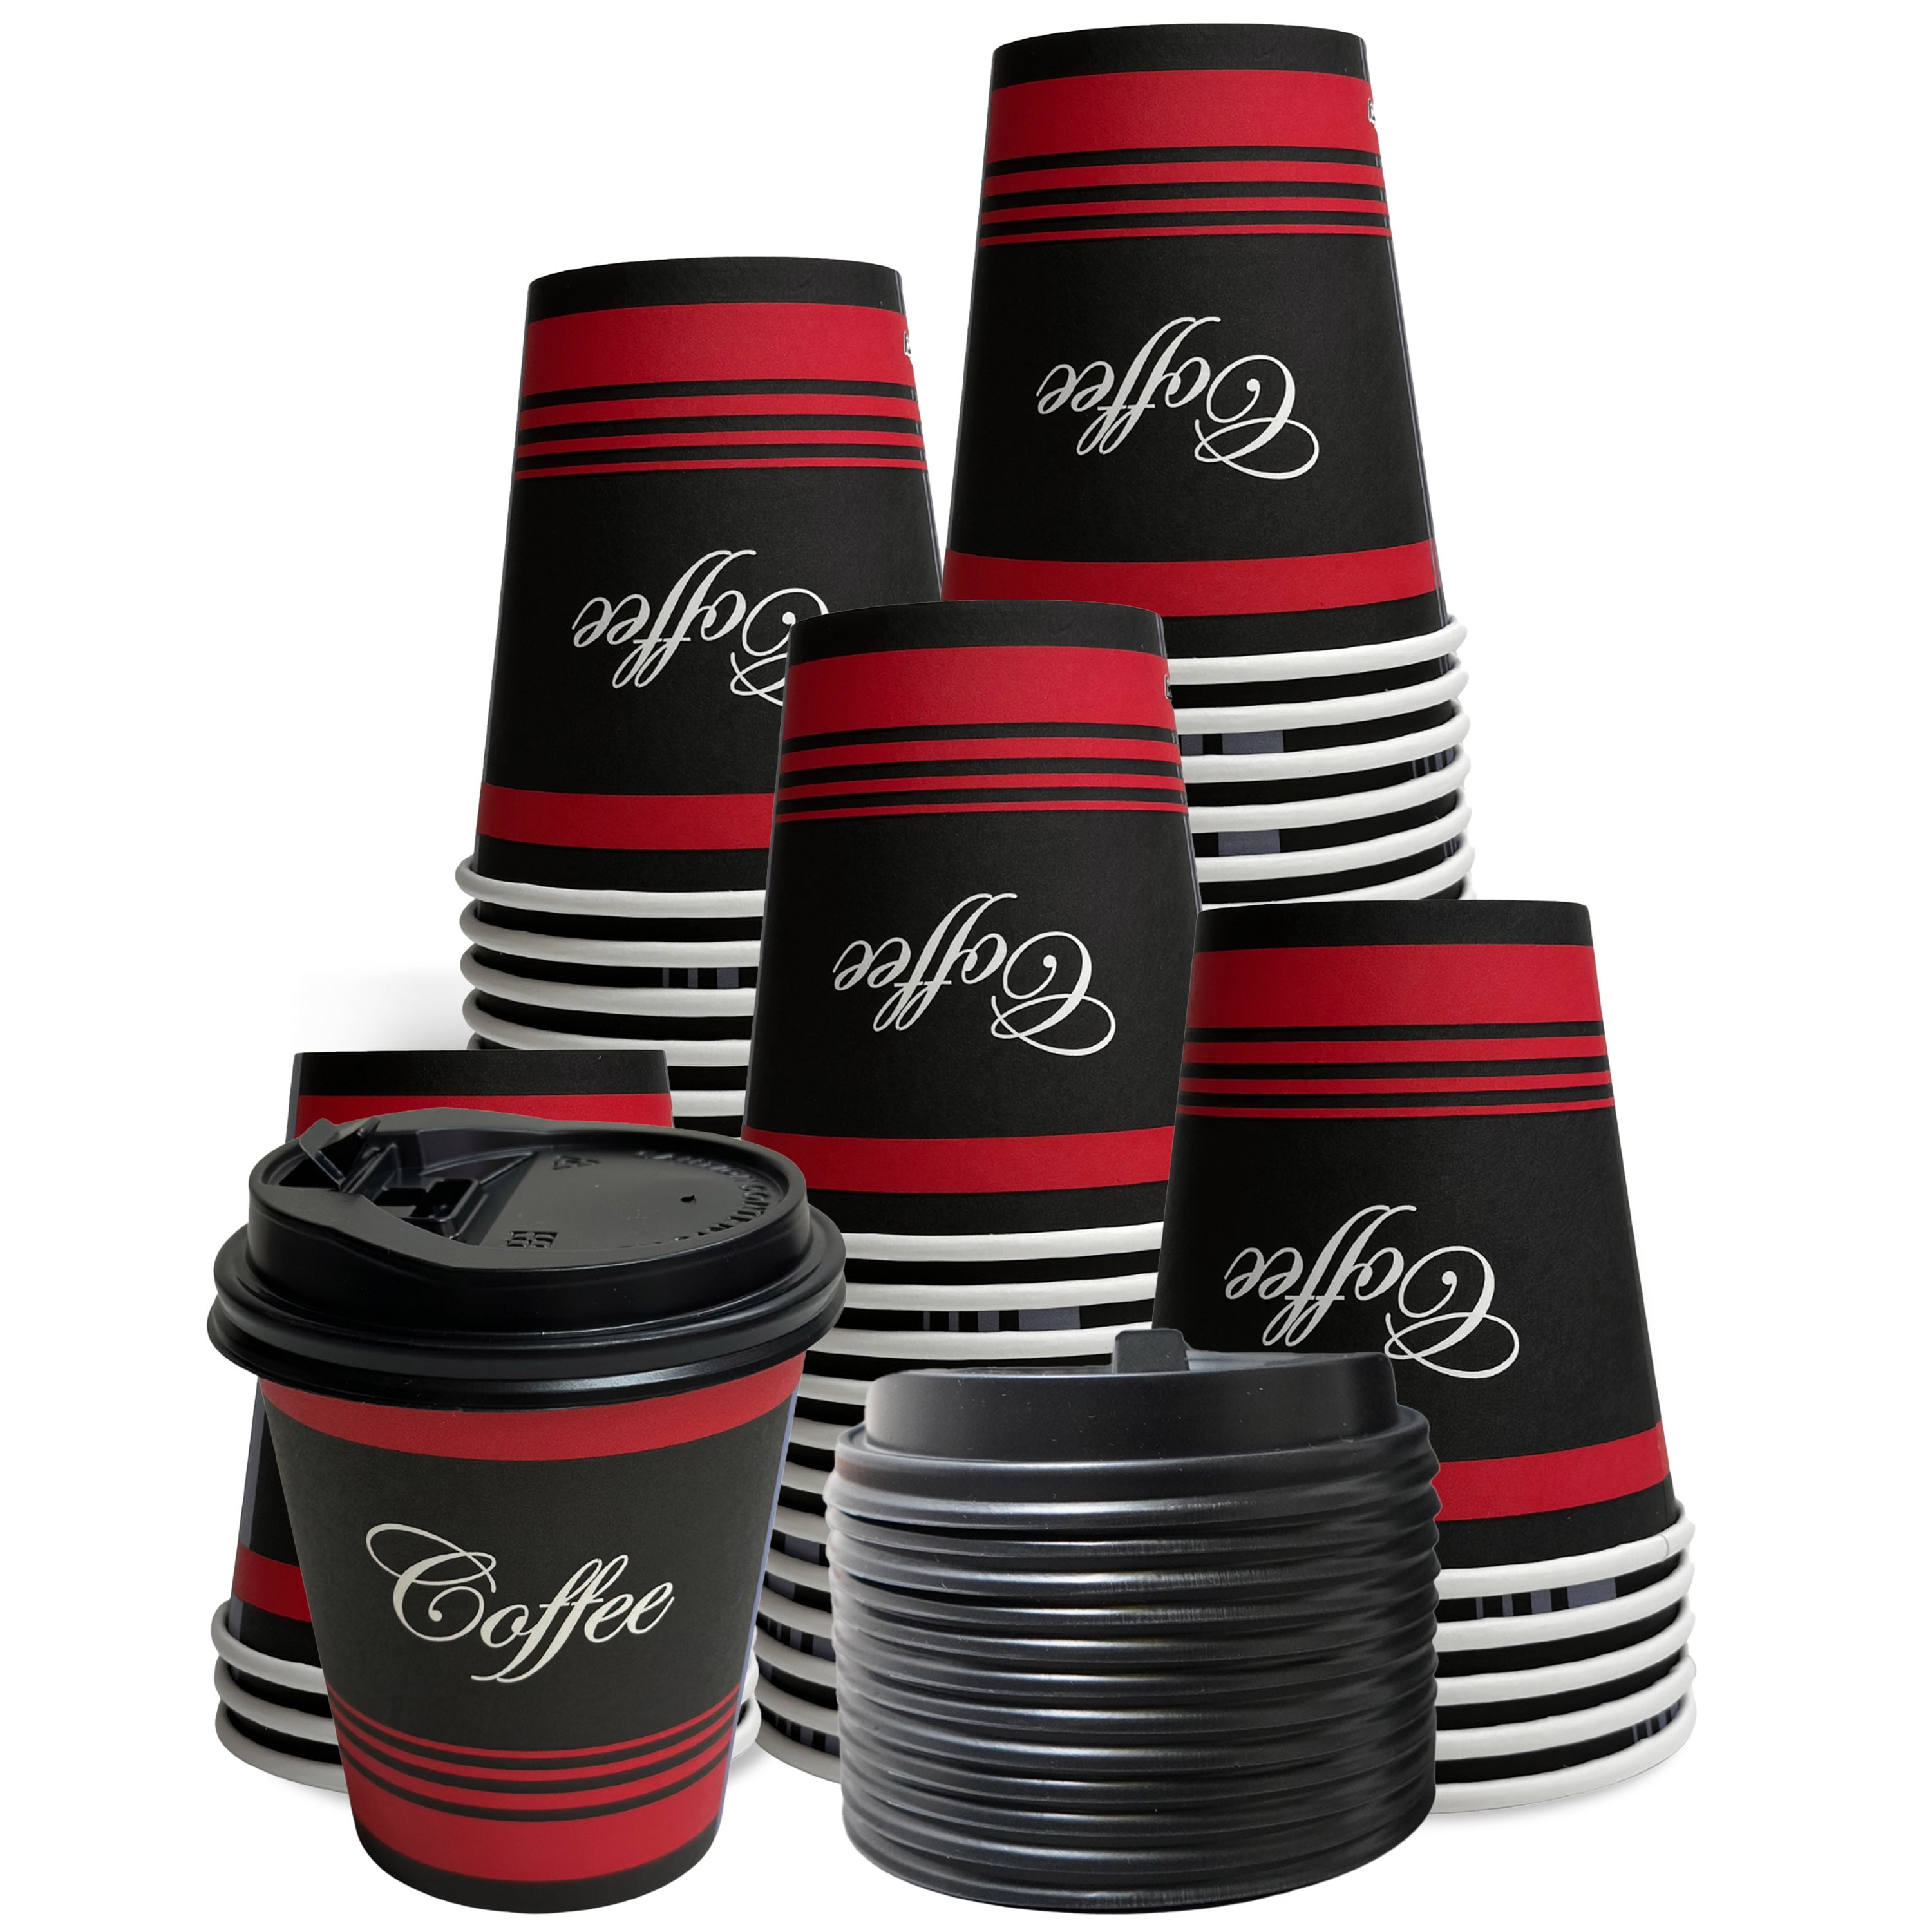 [50 Pack] 12oz Disposable White Paper Coffee Cups with Black Dome Lids and  Protective Corrugated Cup Sleeves - Perfect Disposable Travel Mug for Home